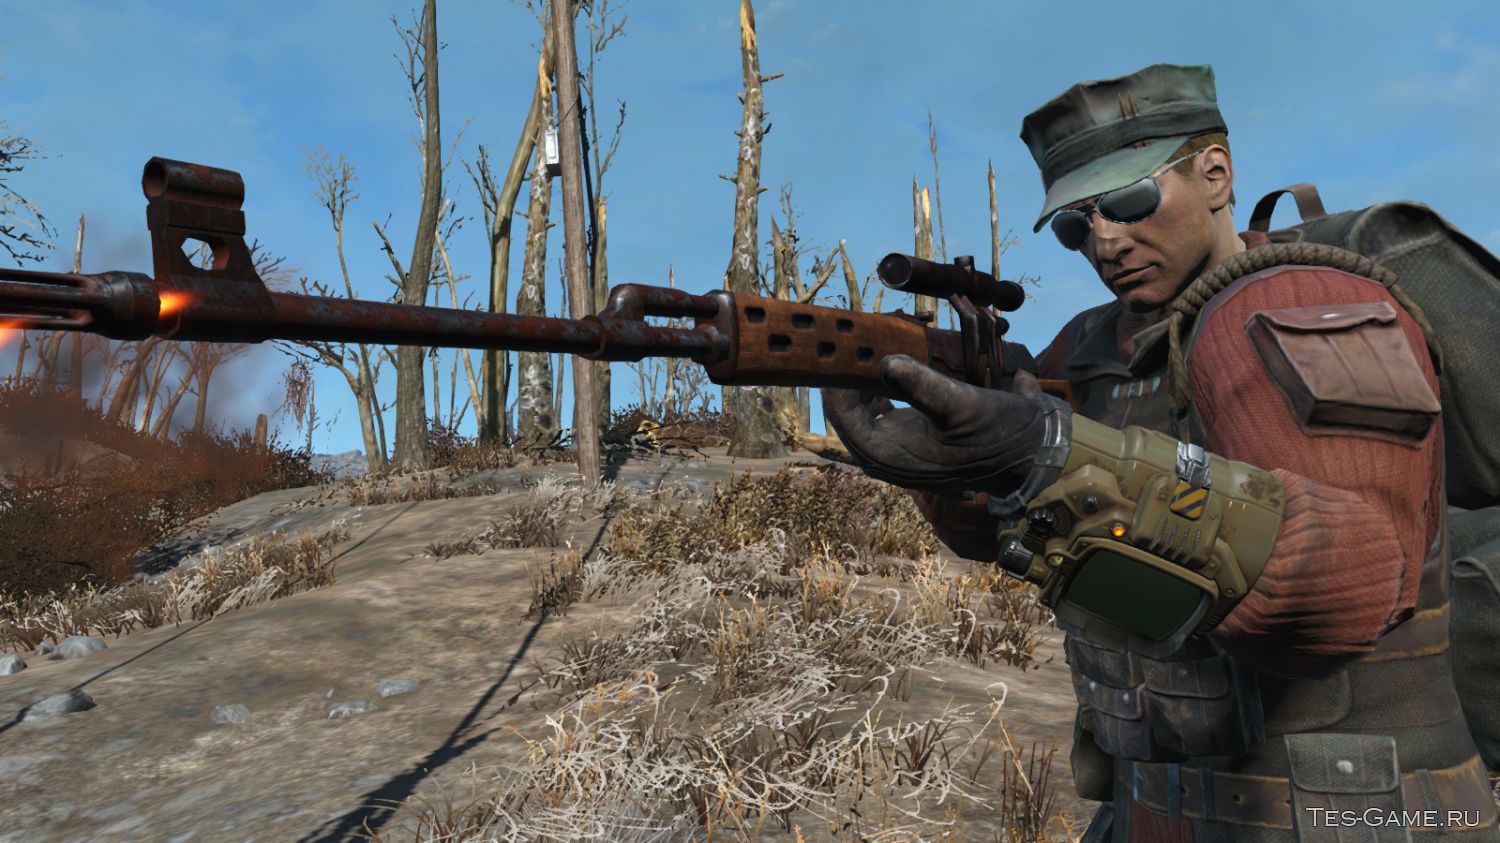 Sniper weapons fallout 4 (120) фото